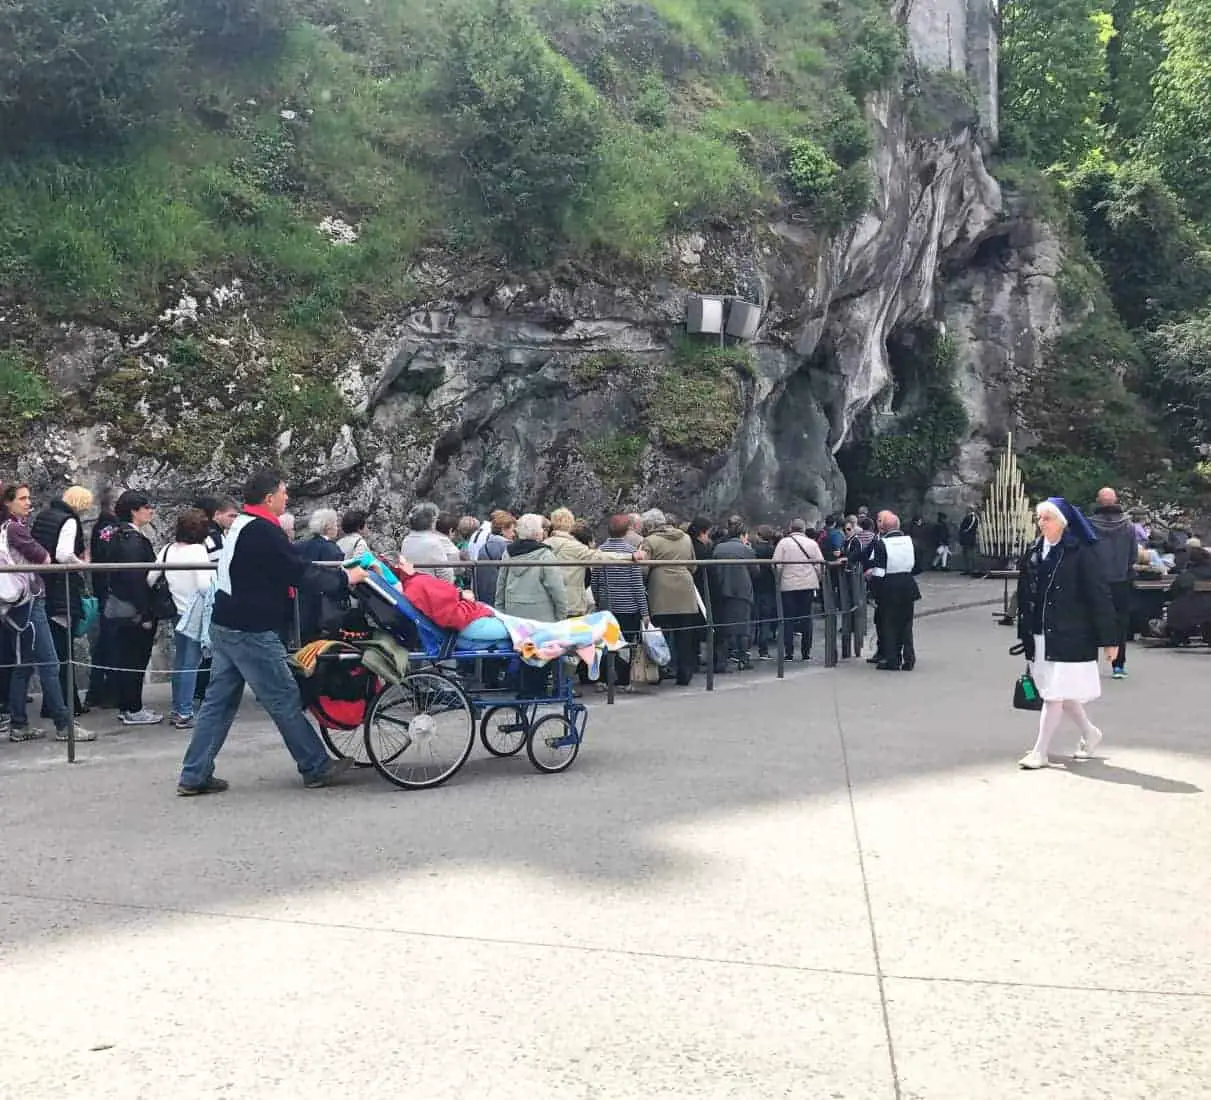 A Lourdes Pilgrimage For the Occasionally Devout Day Tripper